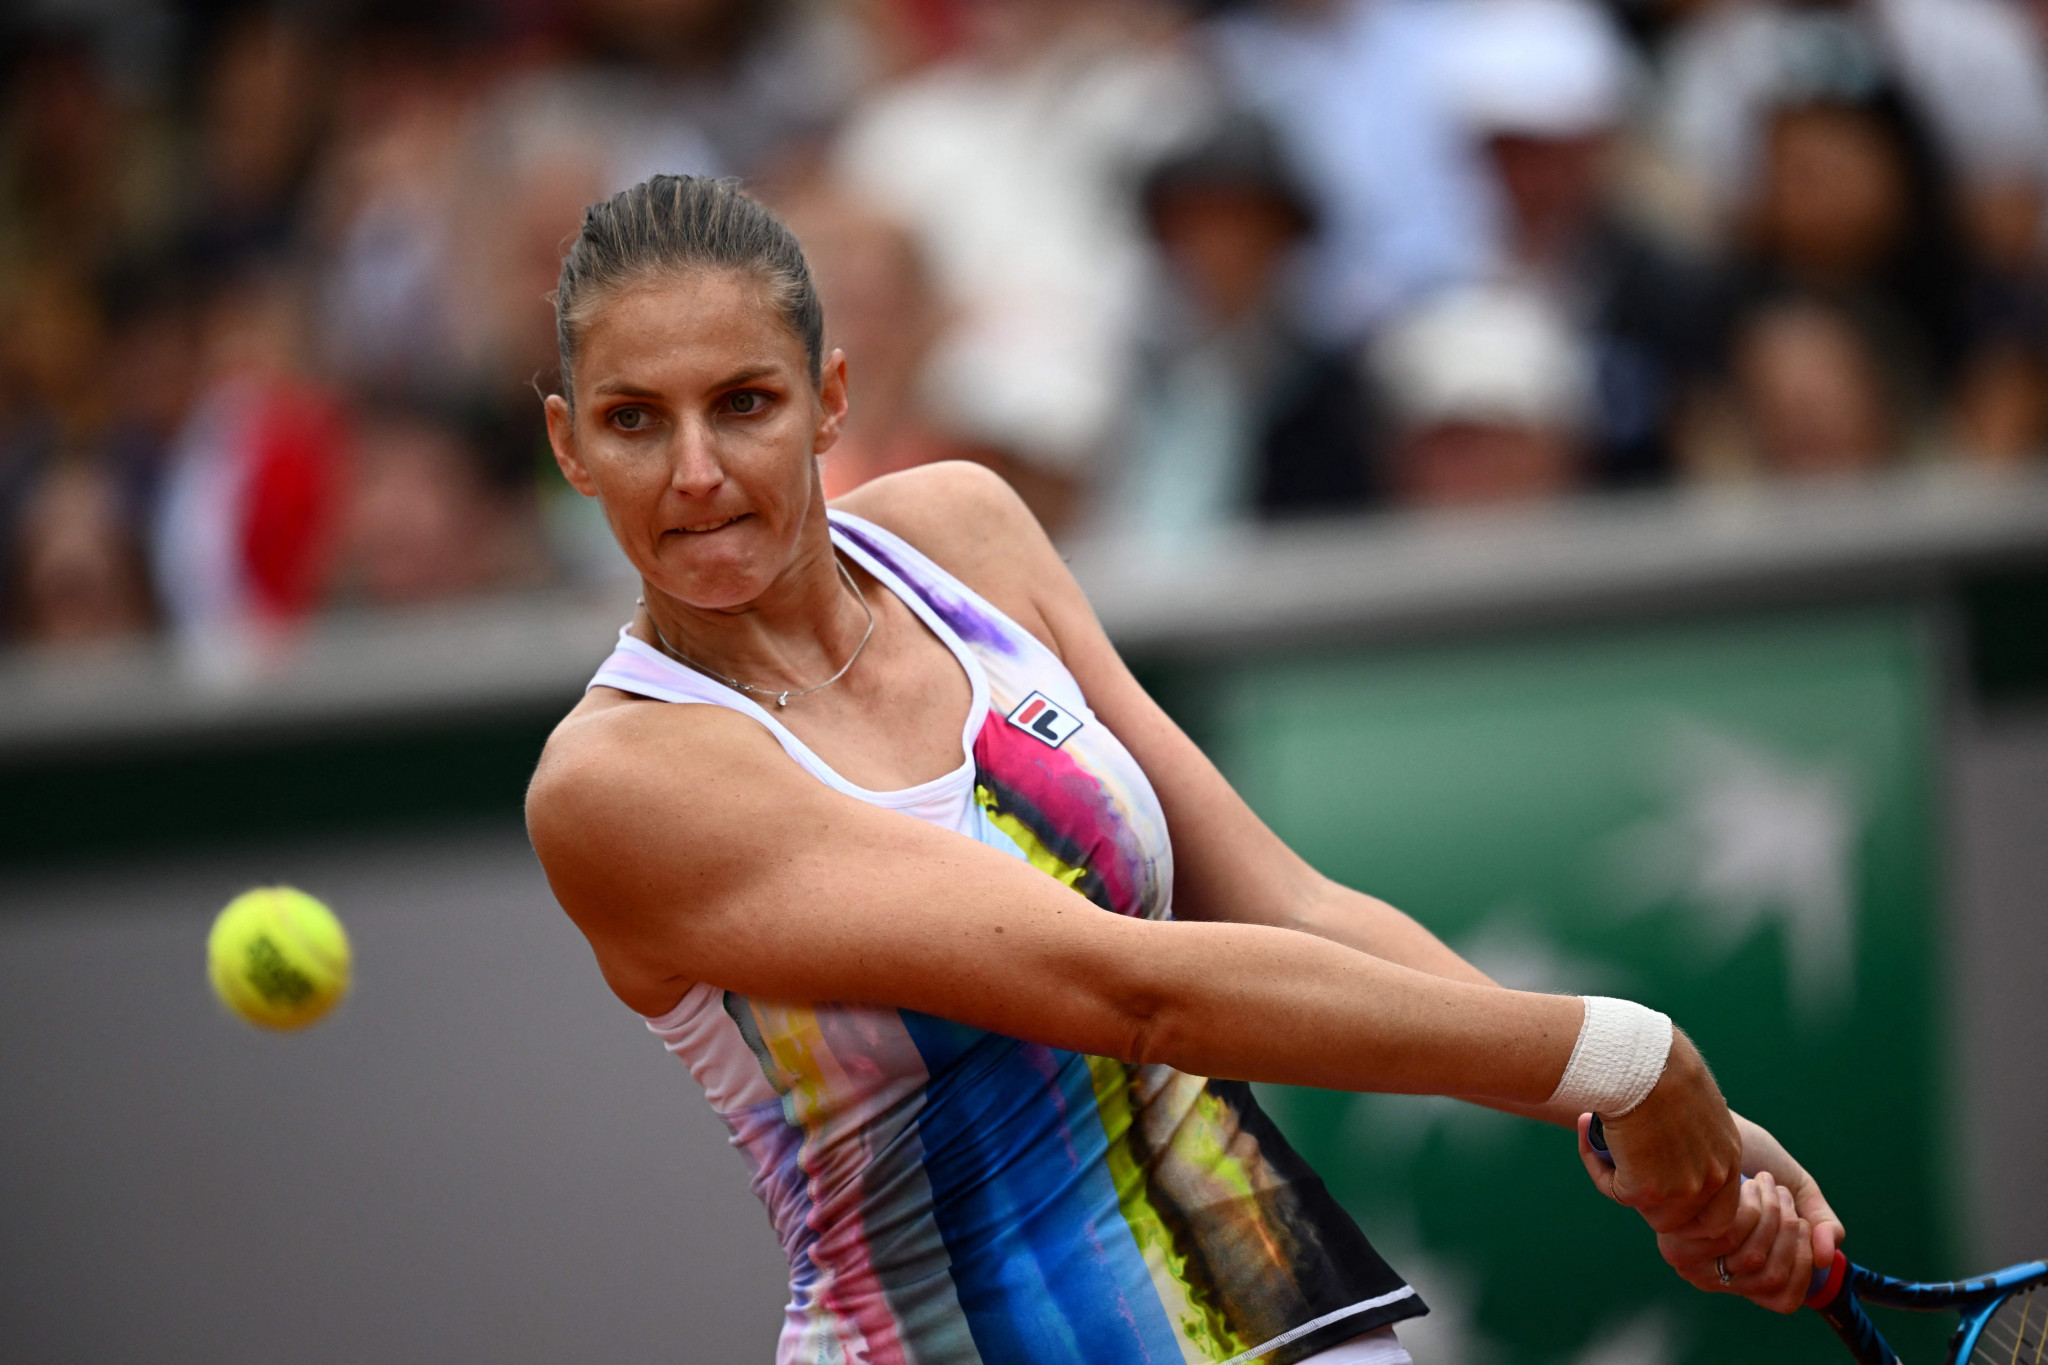 Plíšková and Halep biggest names to crash out in French Open women’s singles round two